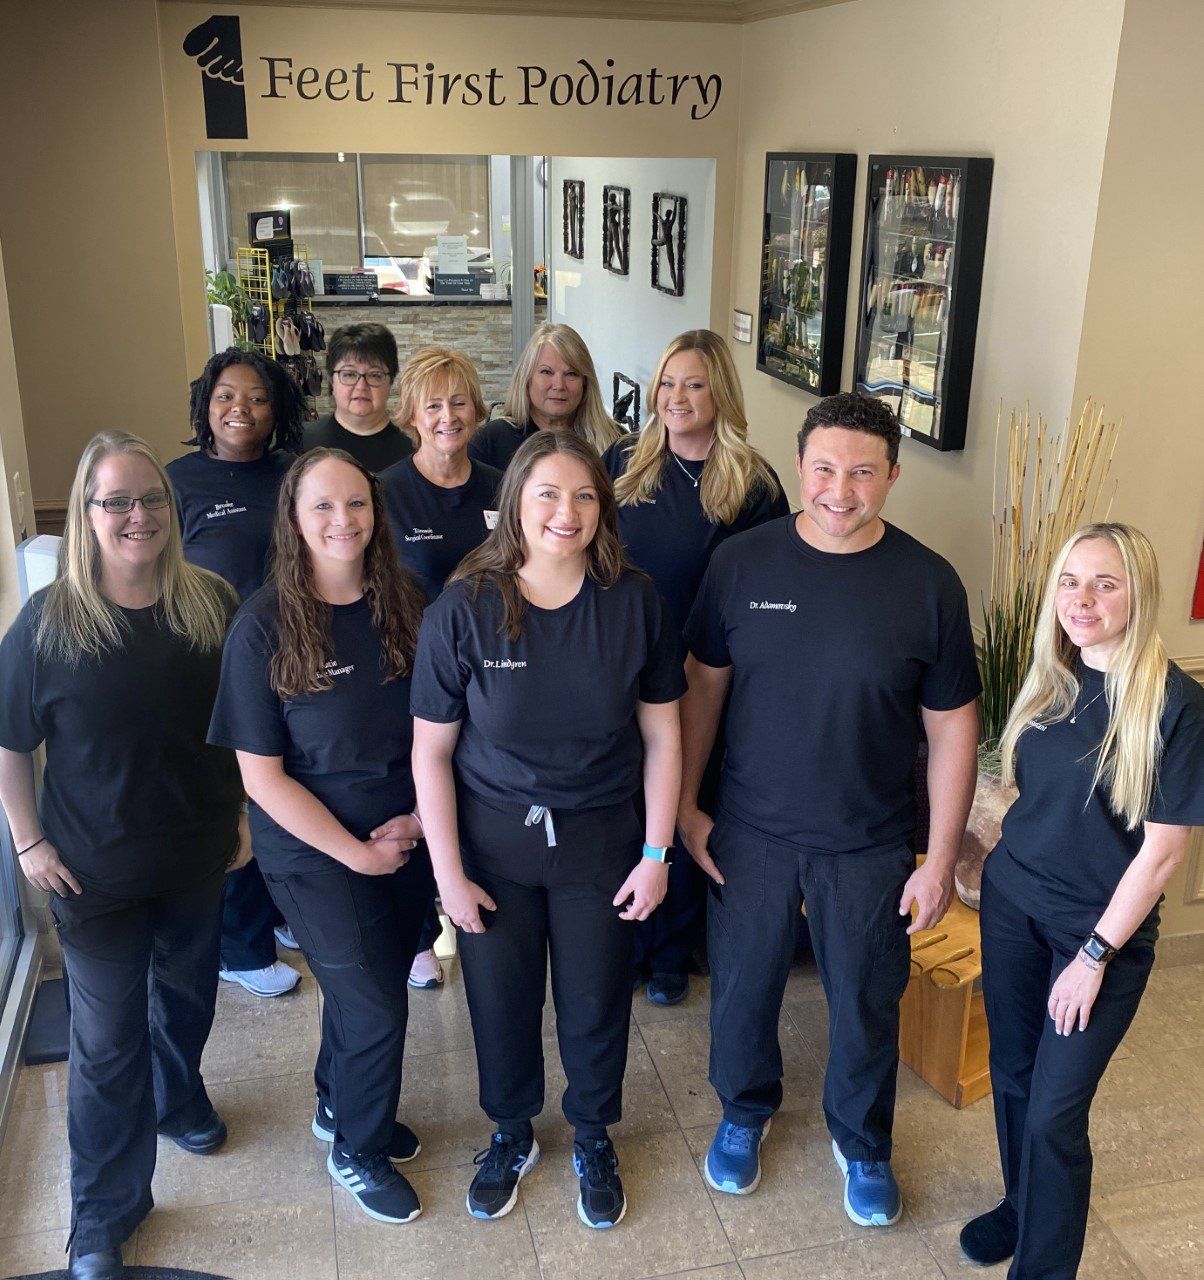 Group Photo - St. Peters, MO - Feet First Podiatry